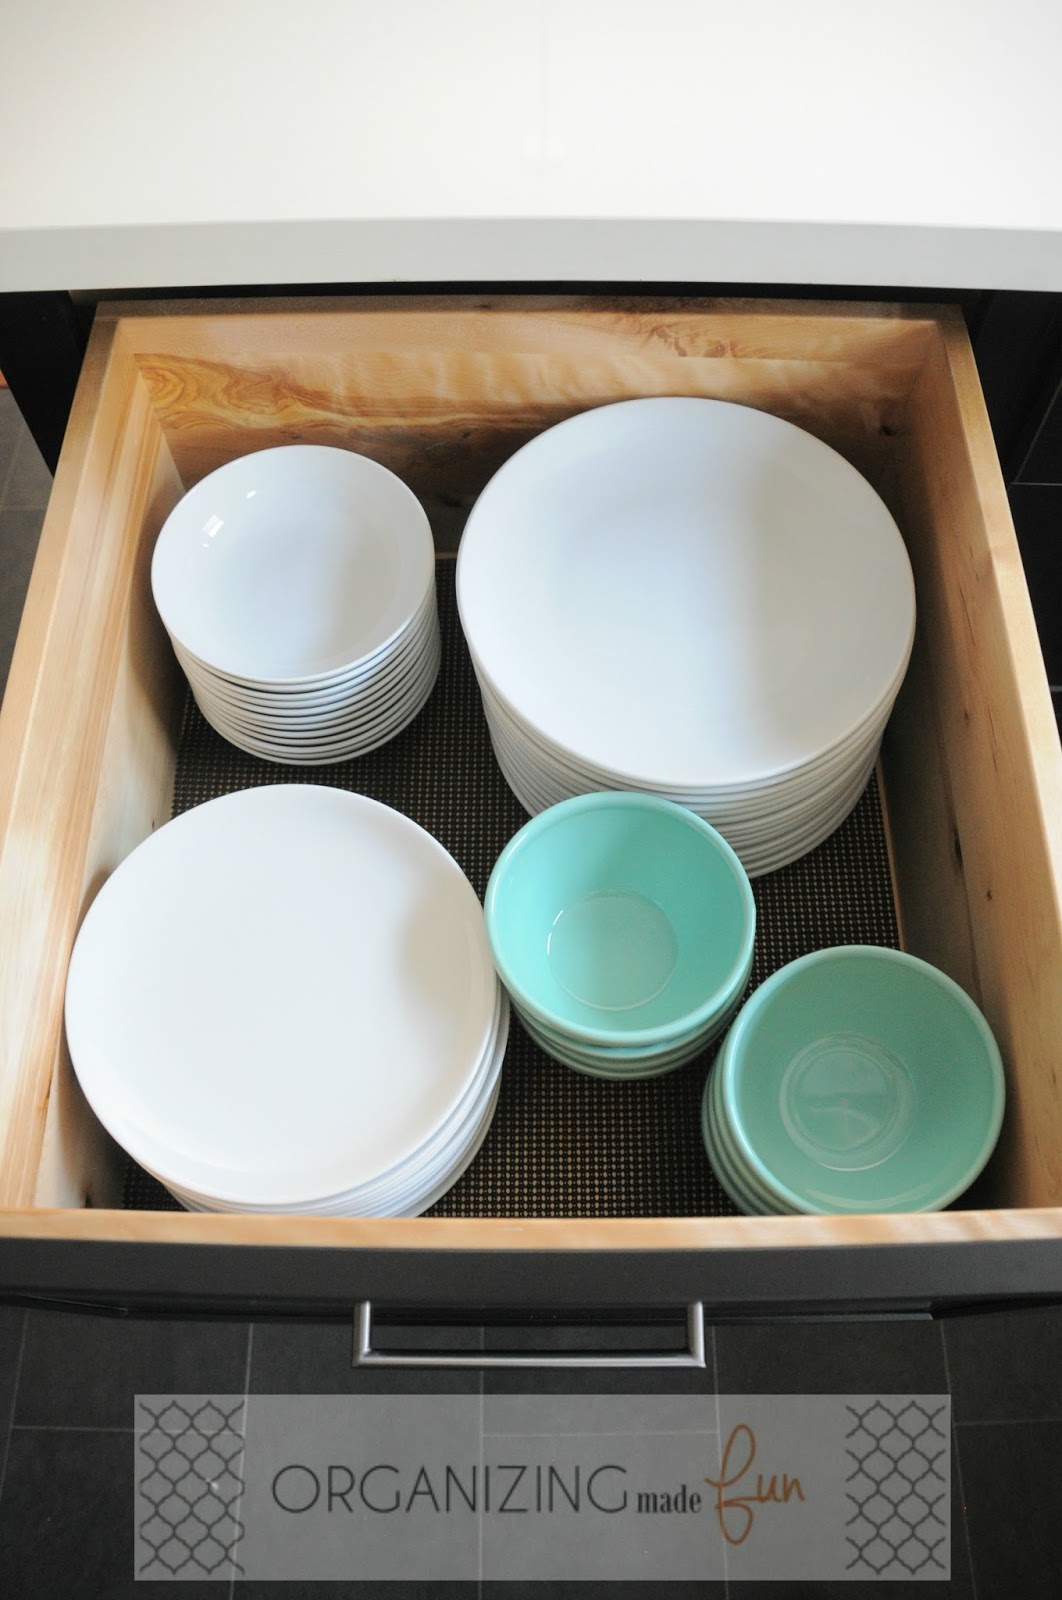 The New Kitchen: Organizing the Drawers | Organizing Made Fun: The New ...